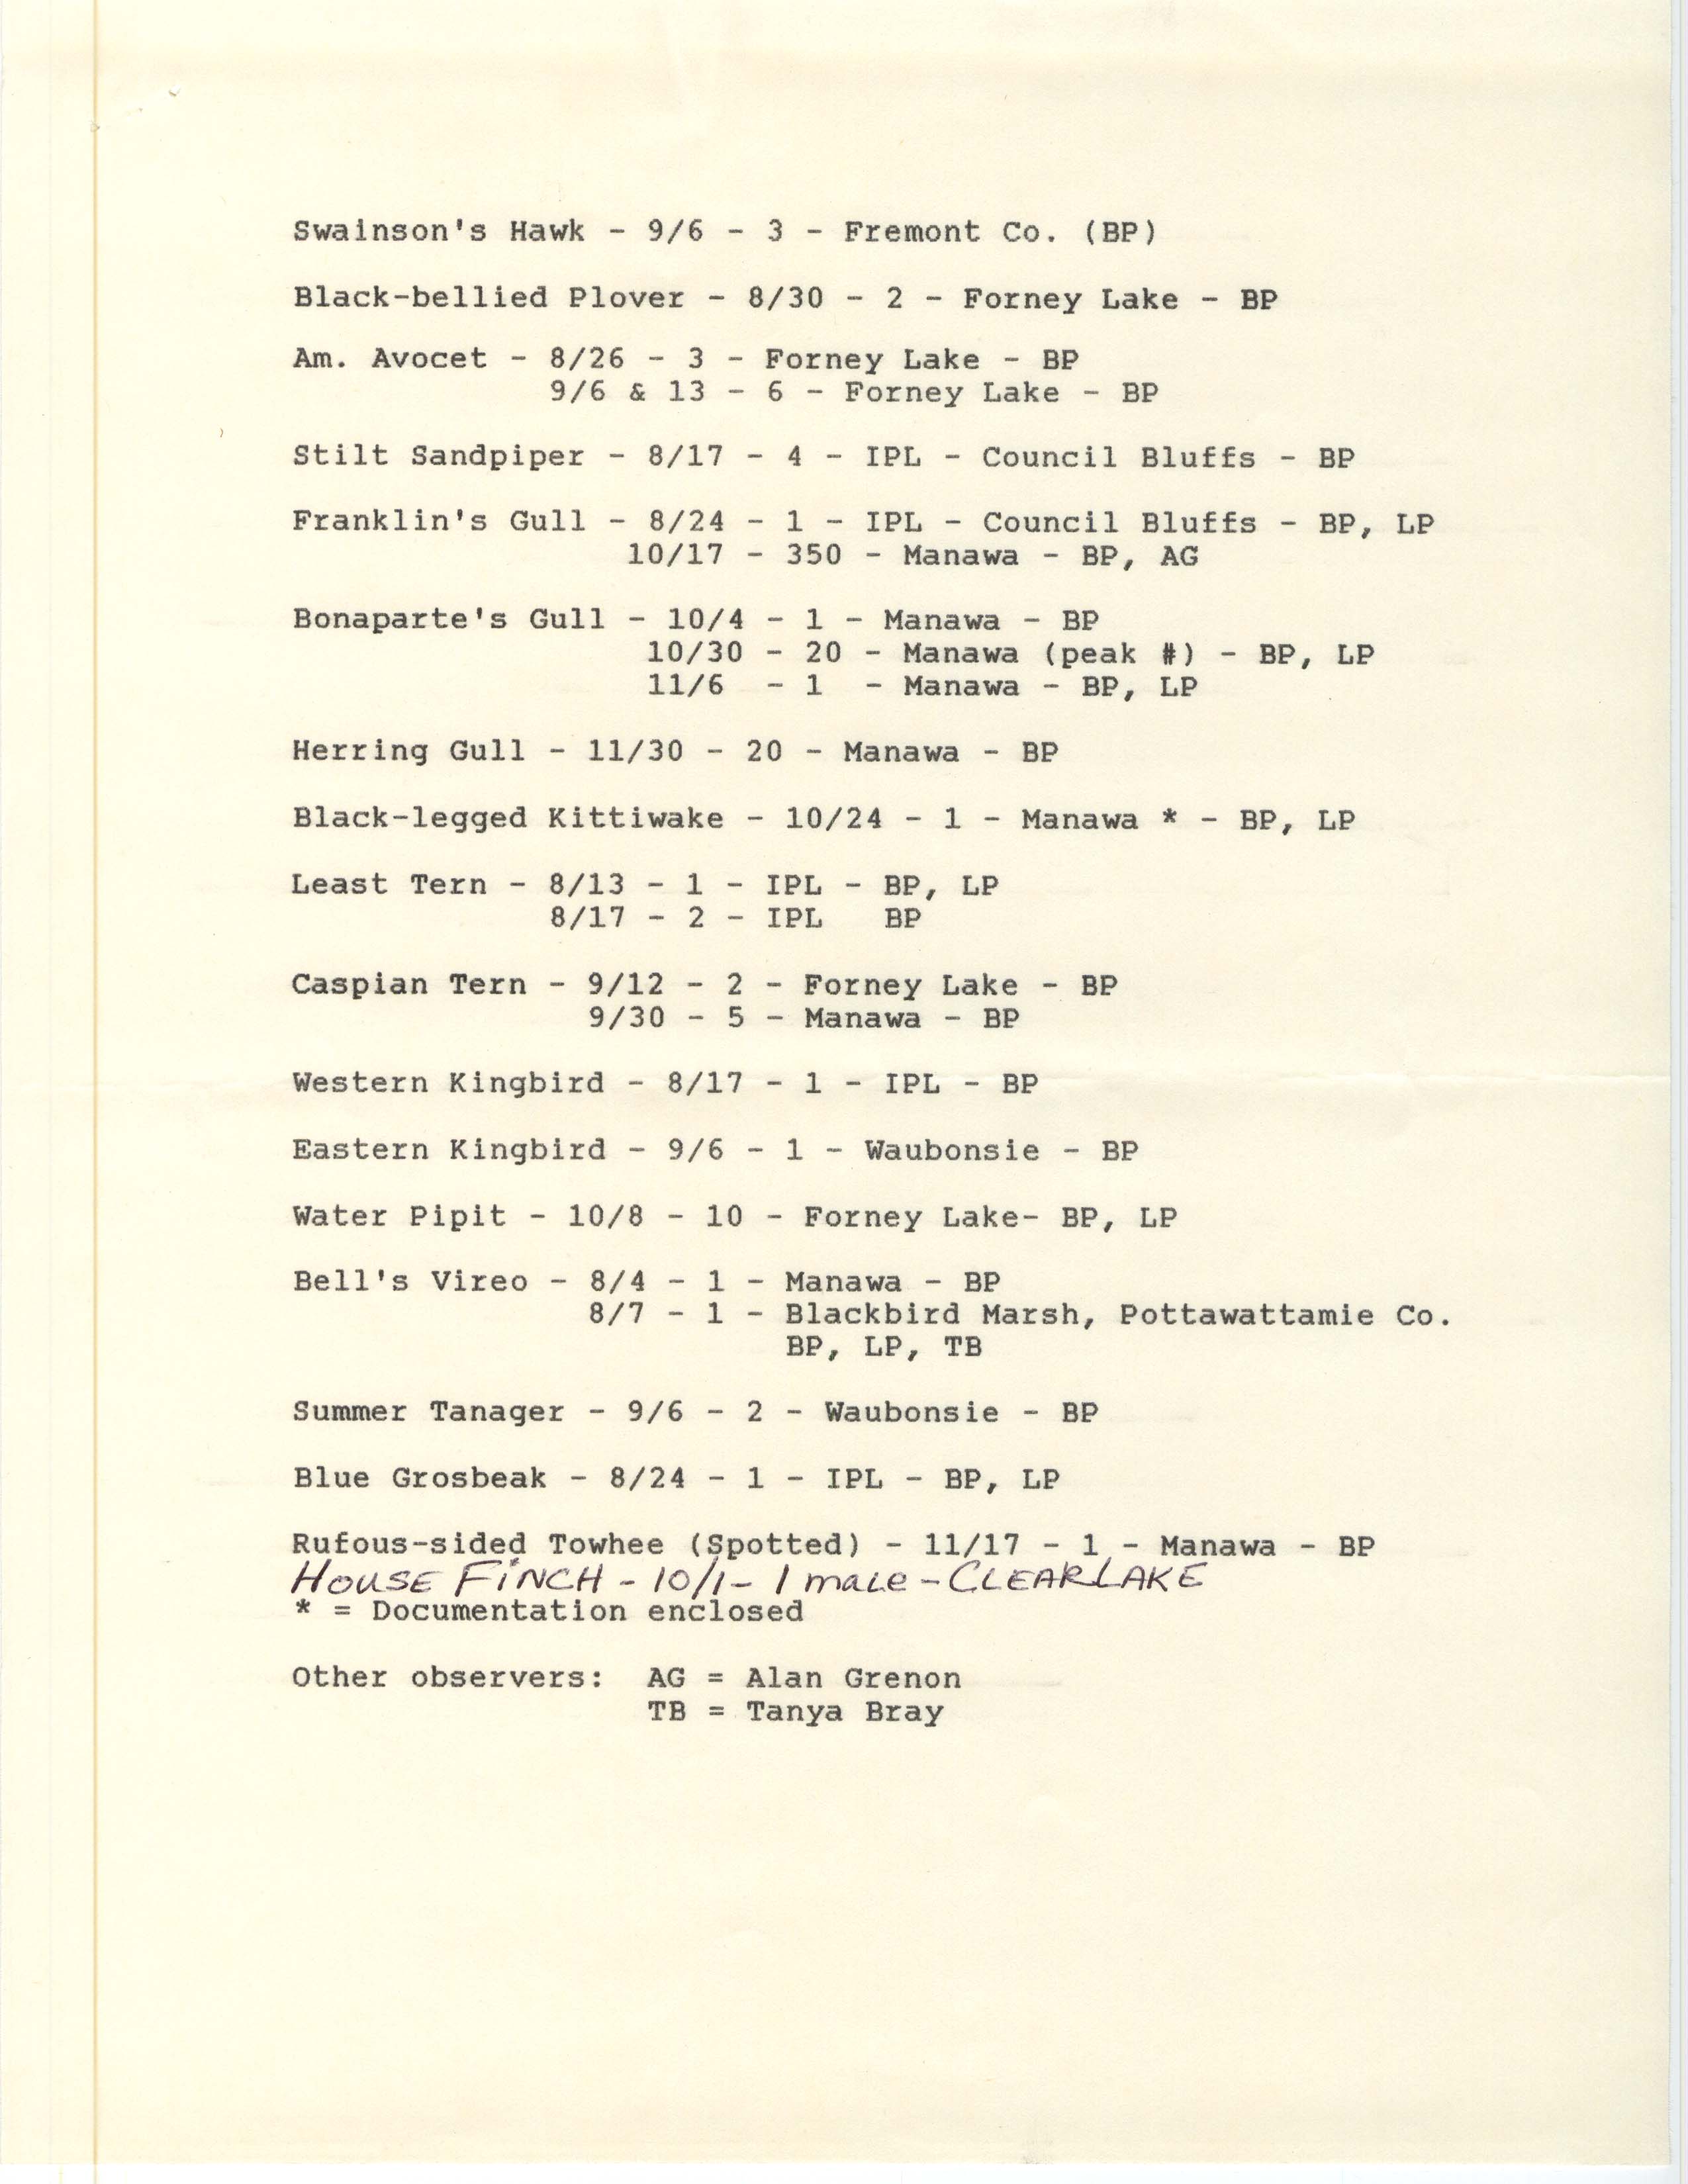 Field notes contributed by Babs Padelford and Loren Padelford, fall 1988